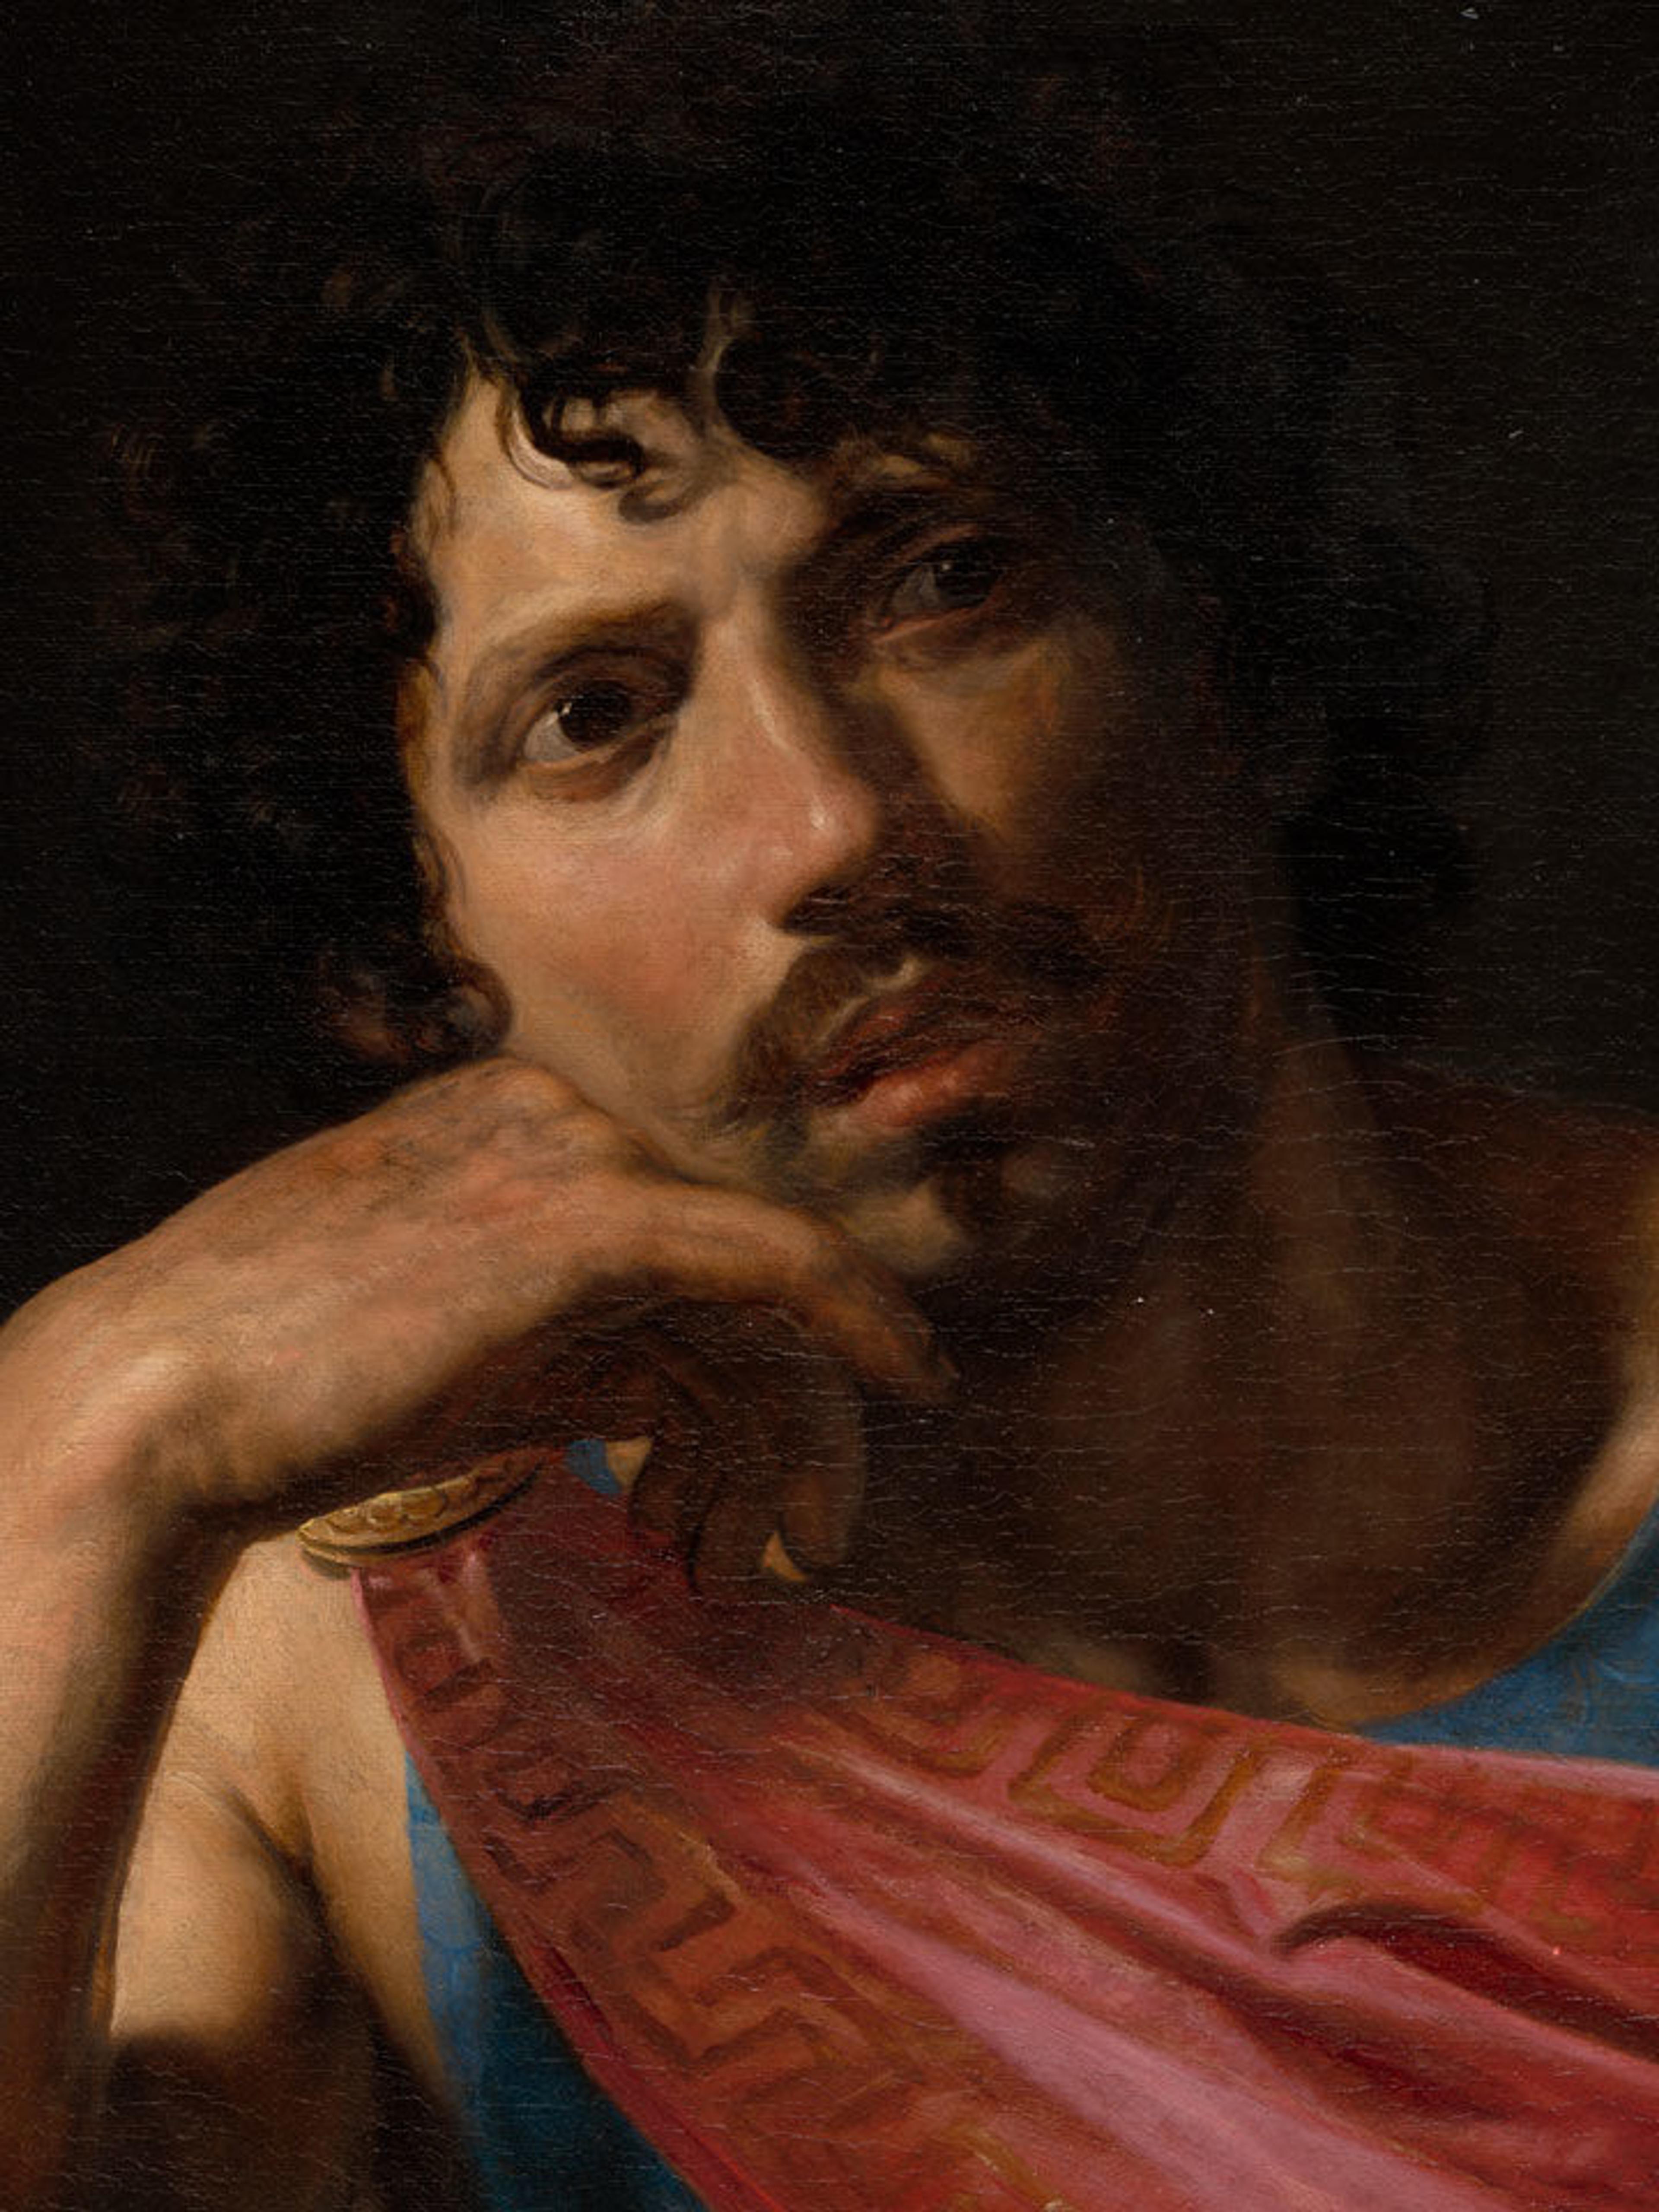 Detail view of a painting from the Italian Baroque, showing a man with black hair and a mustache cloaked in a red and blue garment